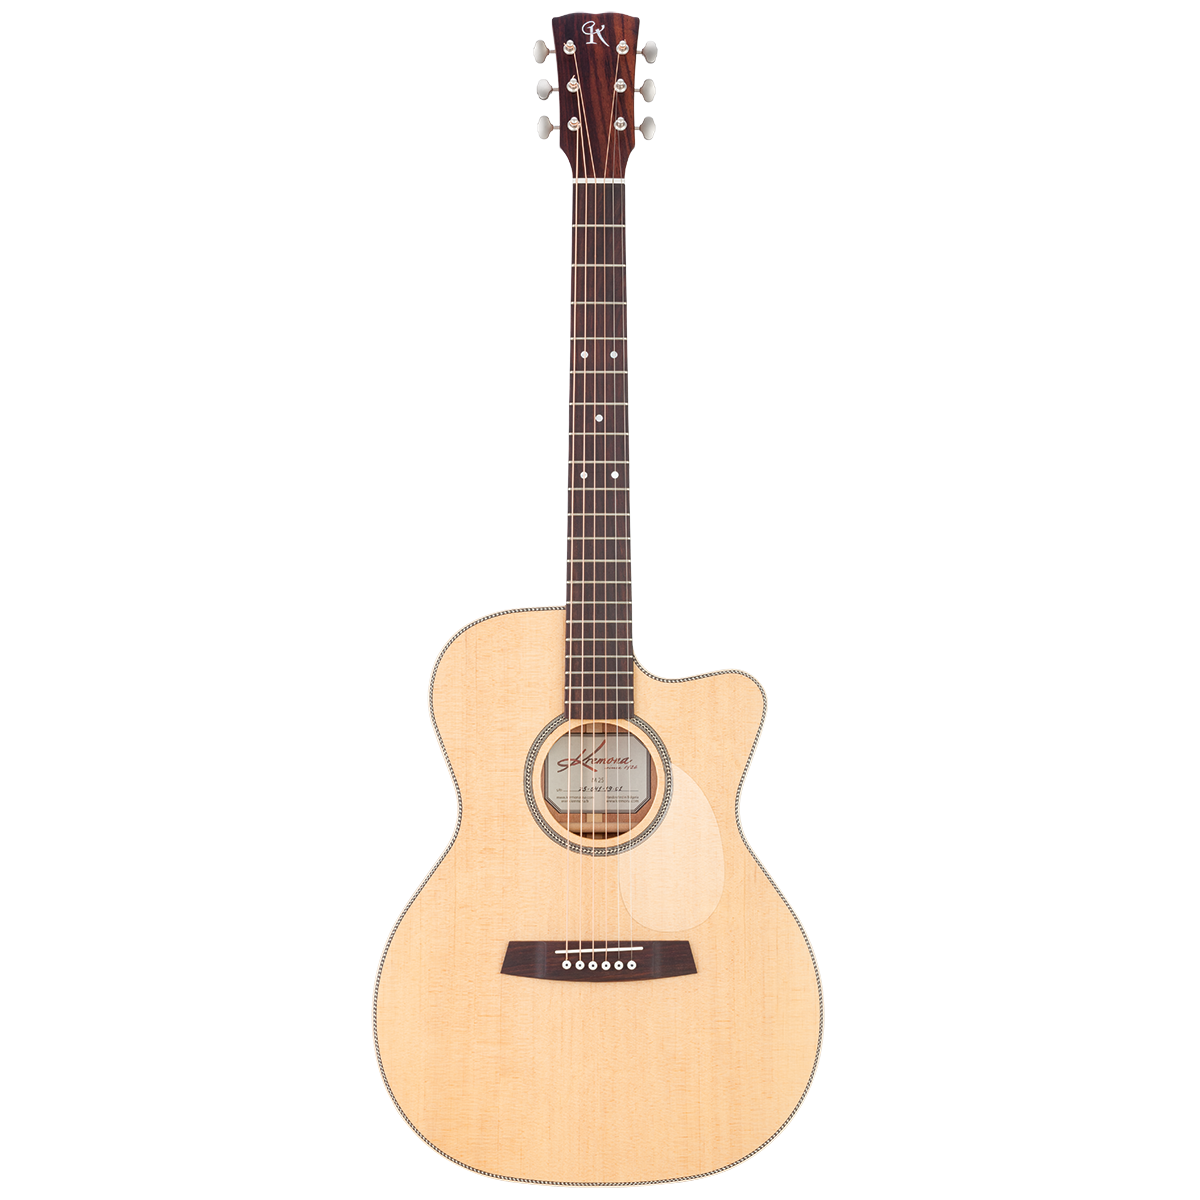 Kremona M25E Steel String Solid Top & Back Acoustic fitted with LR Baggs pickup and Case